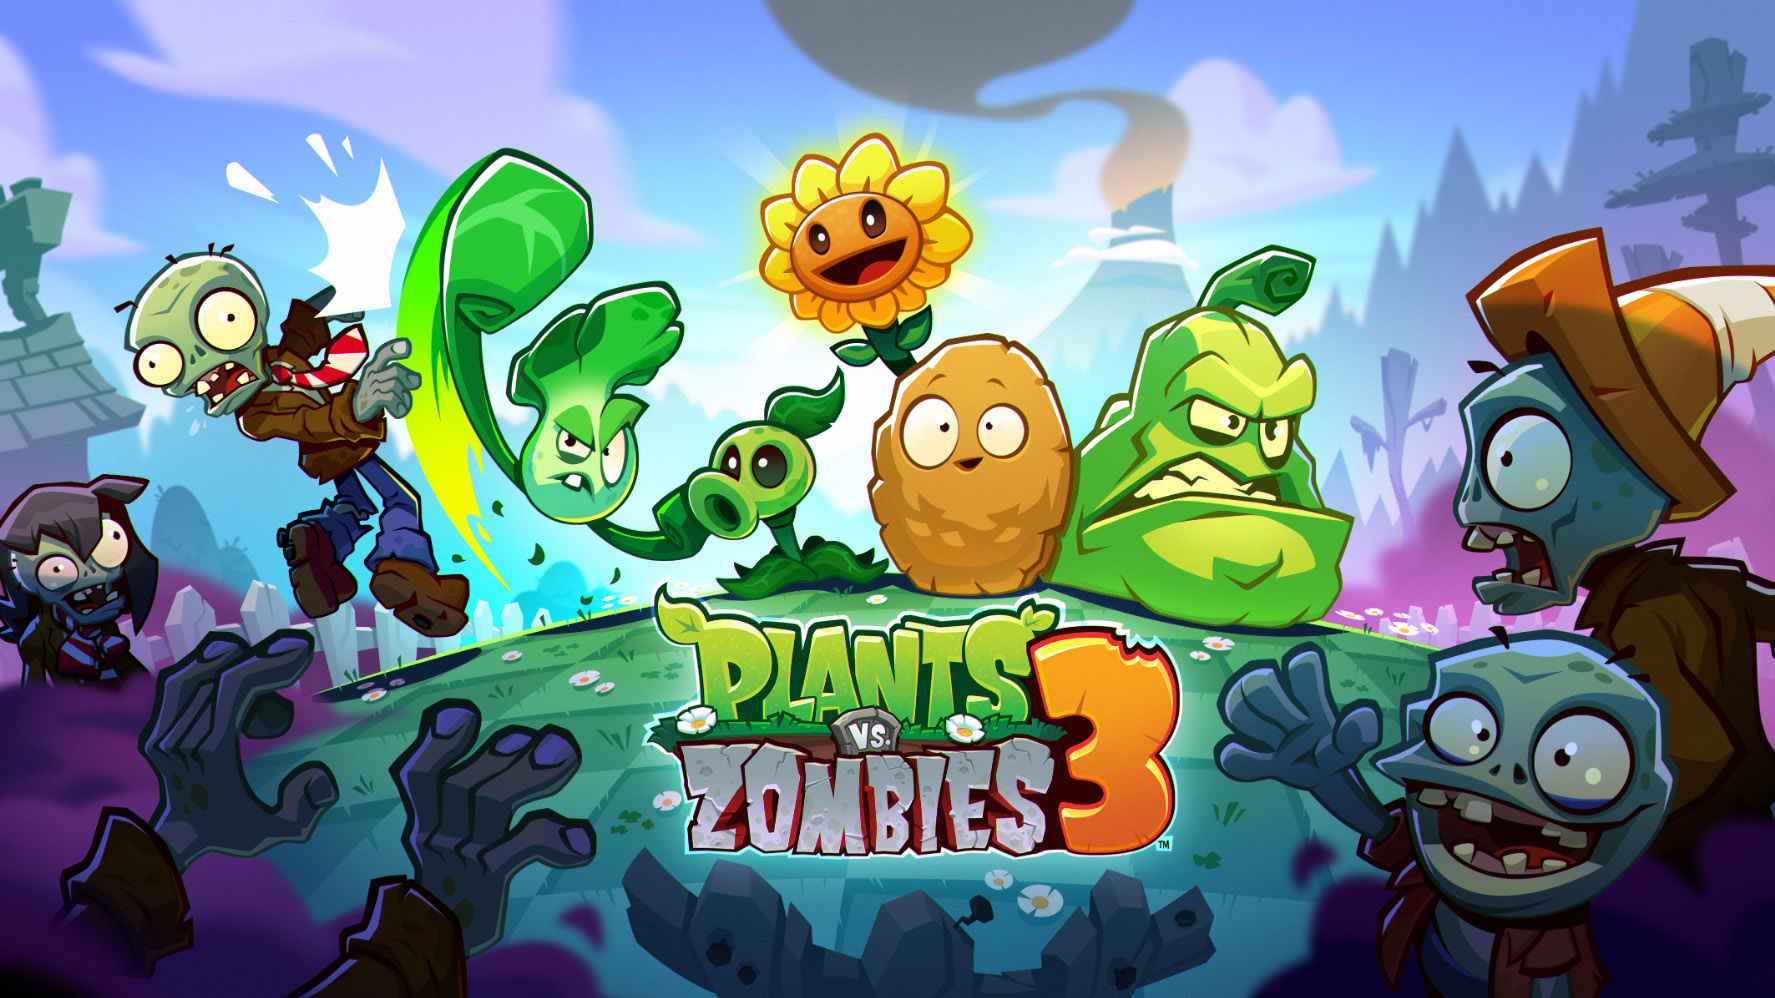 what does keys do 25 stars plants zombies 2 xbox